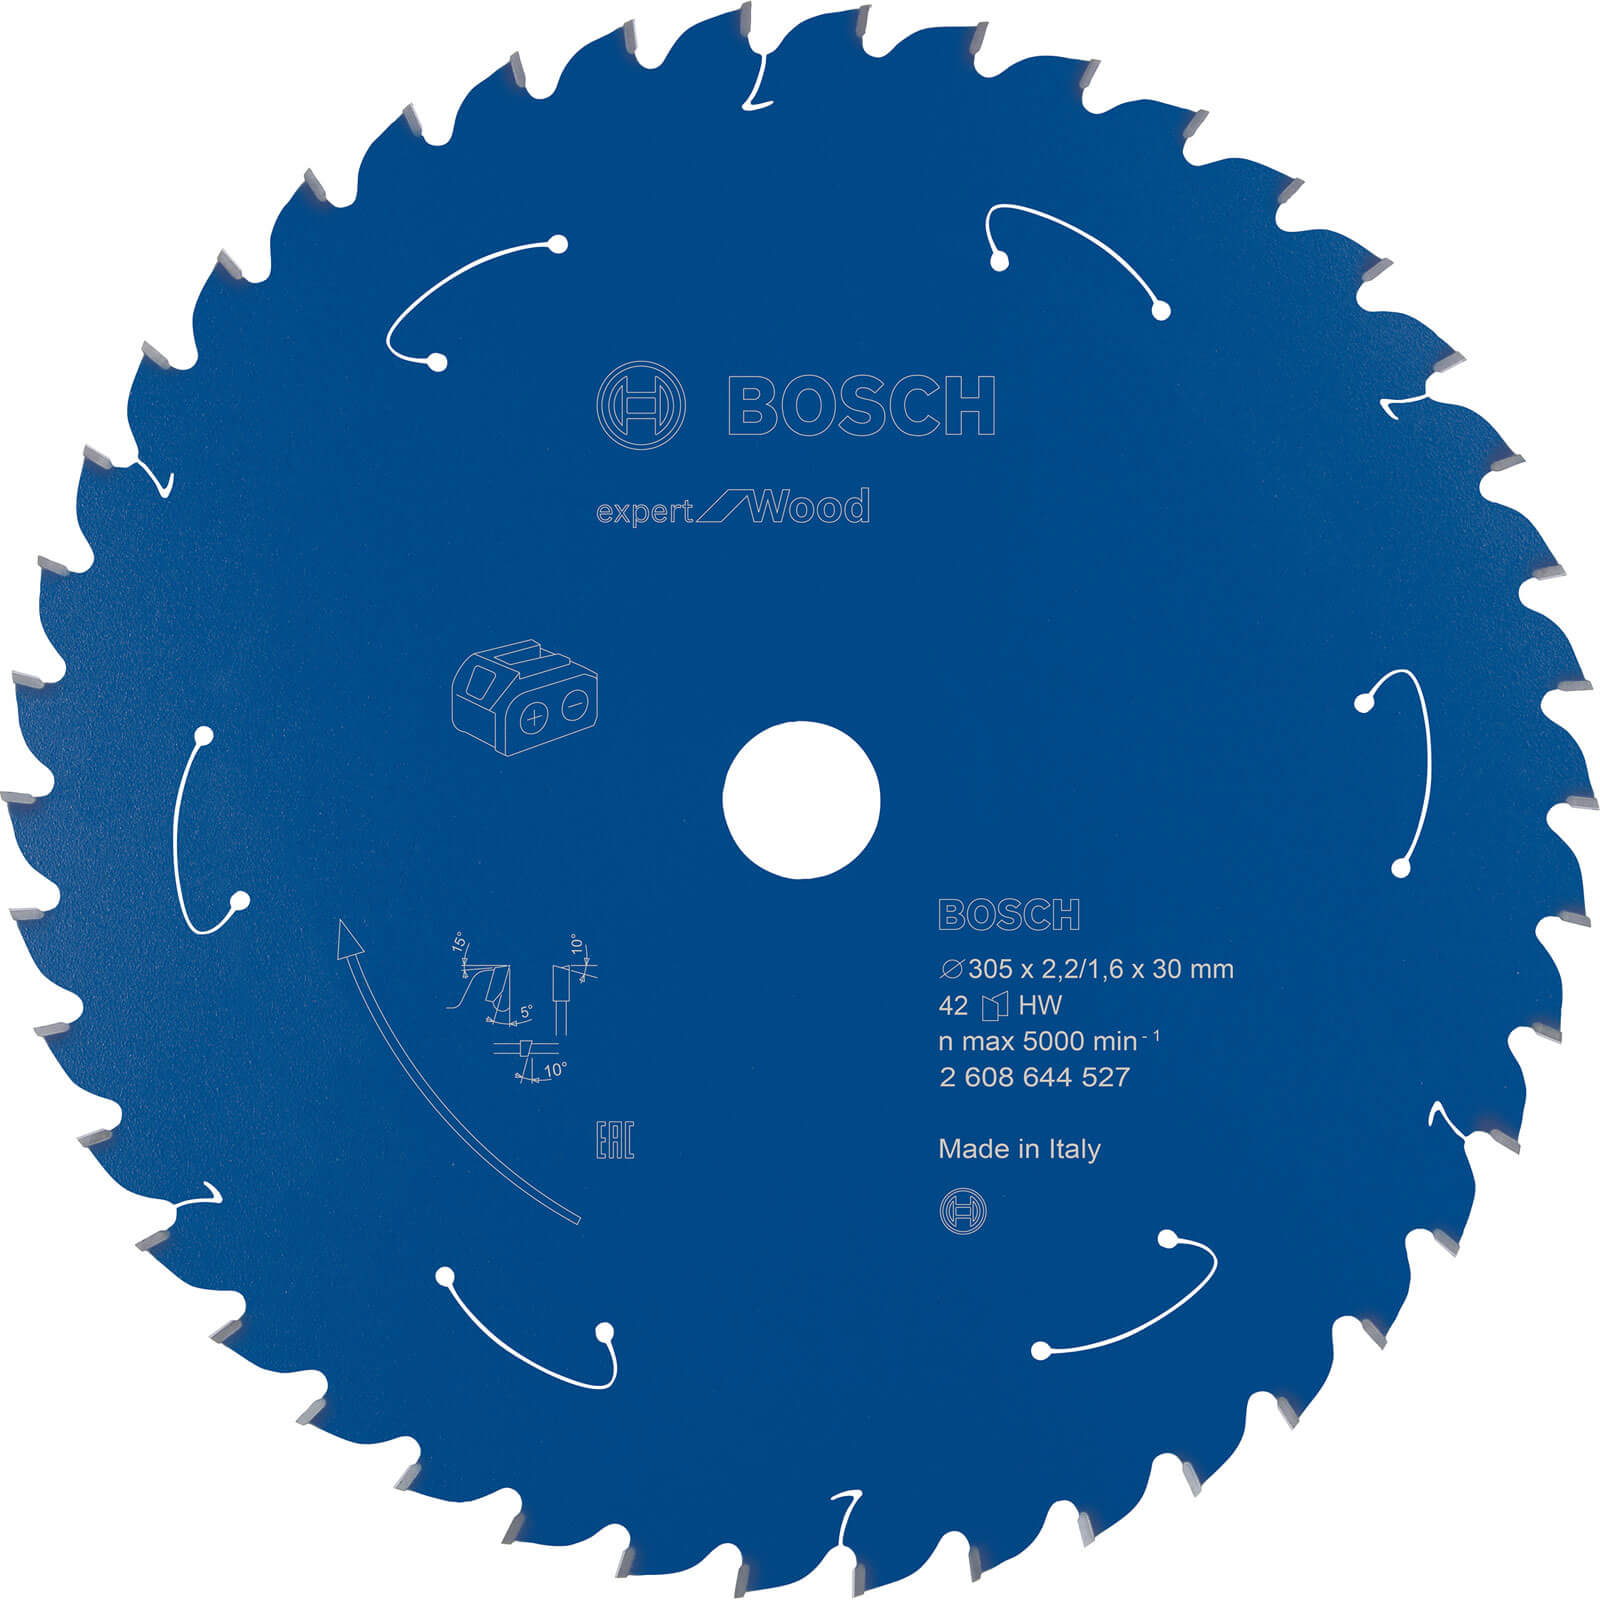 Image of Bosch Expert Wood Cutting Cordless Mitre Saw Blade 305mm 42T 30mm